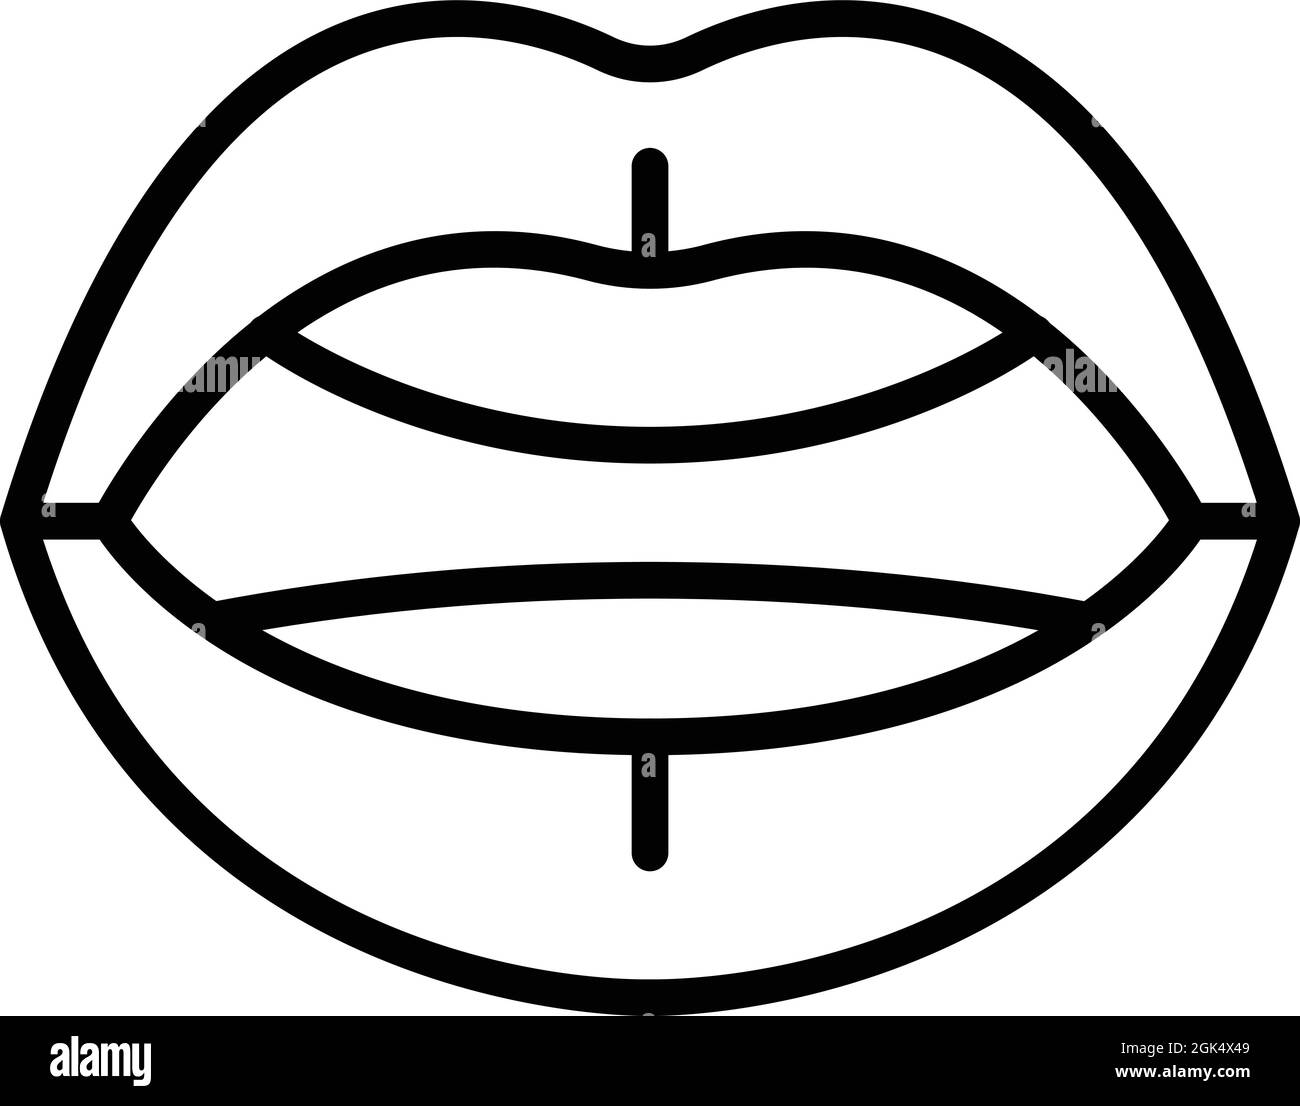 Phonetic chart Cut Out Stock Images & Pictures - Alamy